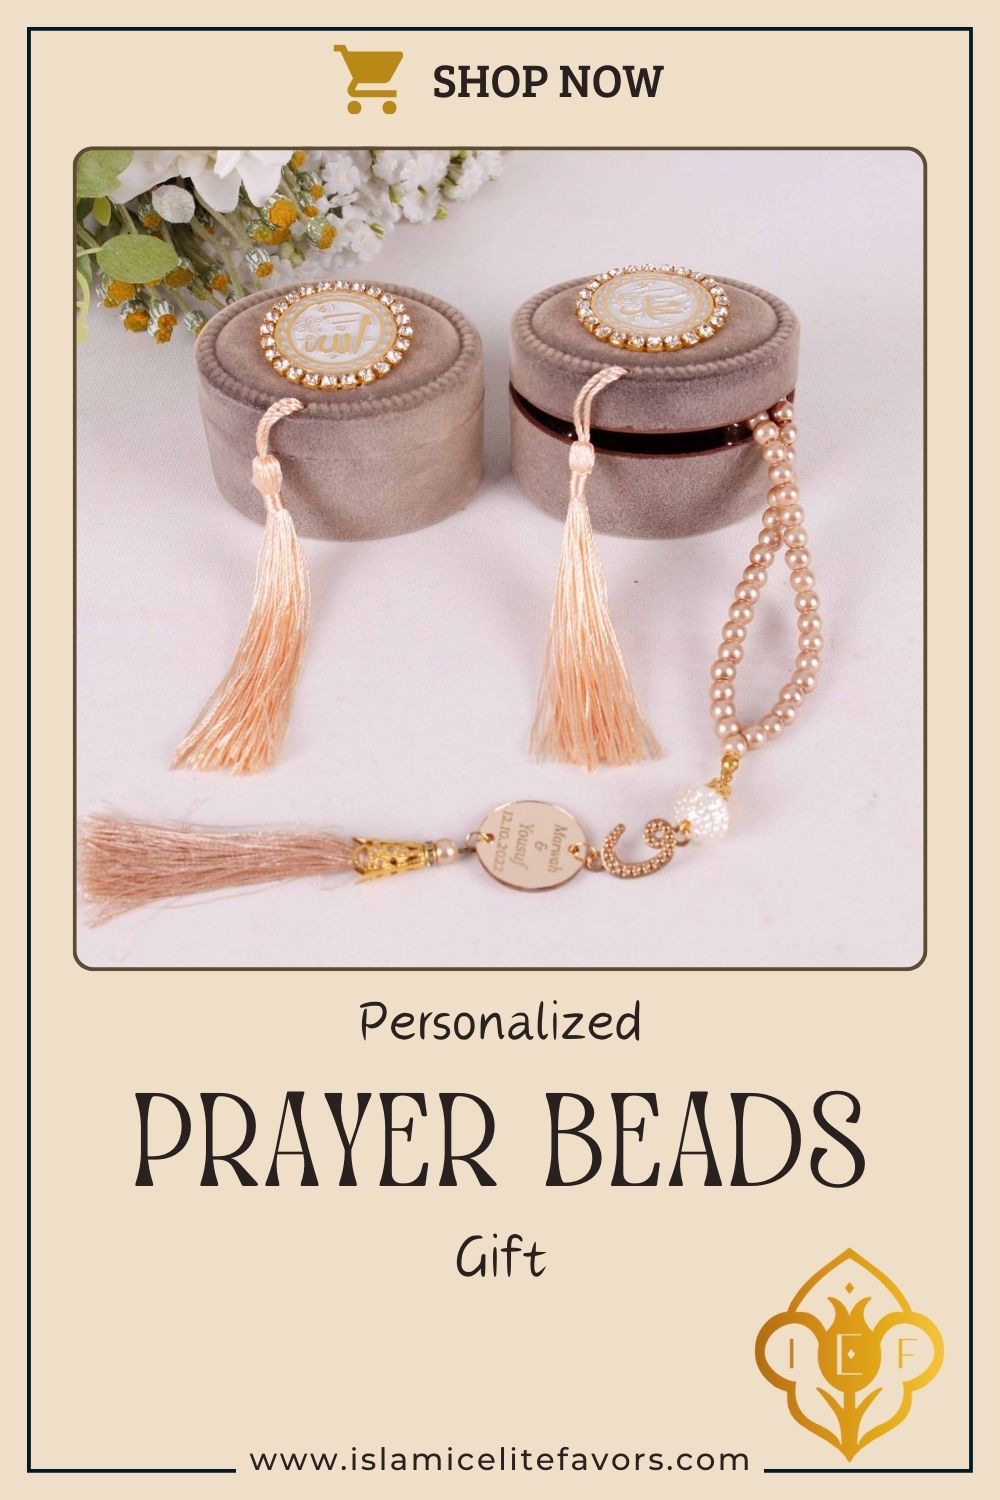 Personalized Velvet Box Pearl Prayer Beads Tasbeeh Wedding Favors - Islamic Elite Favors is a handmade gift shop offering a wide variety of unique and personalized gifts for all occasions. Whether you're looking for the perfect Ramadan, Eid, Hajj, wedding gift or something special for a birthday, baby shower or anniversary, we have something for everyone. High quality, made with love.